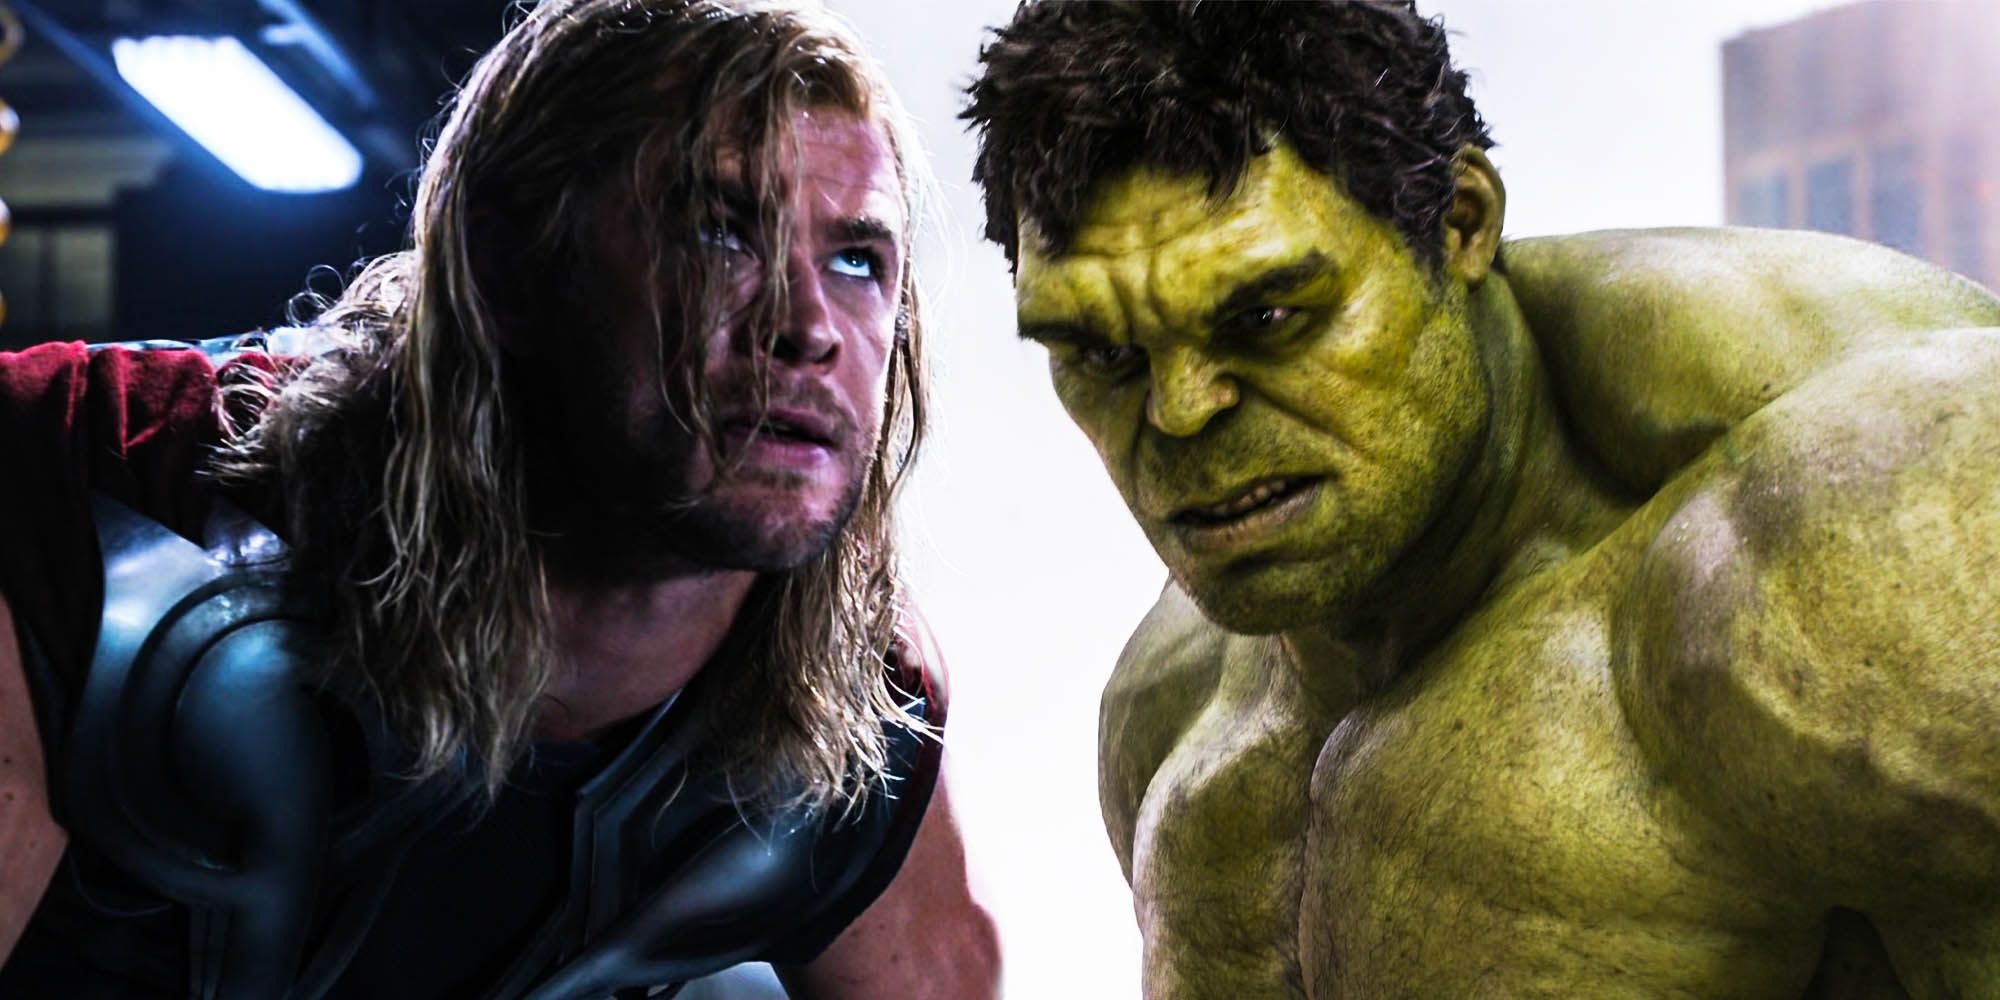 The Avengers Thor vs Hulk who was the most powerful